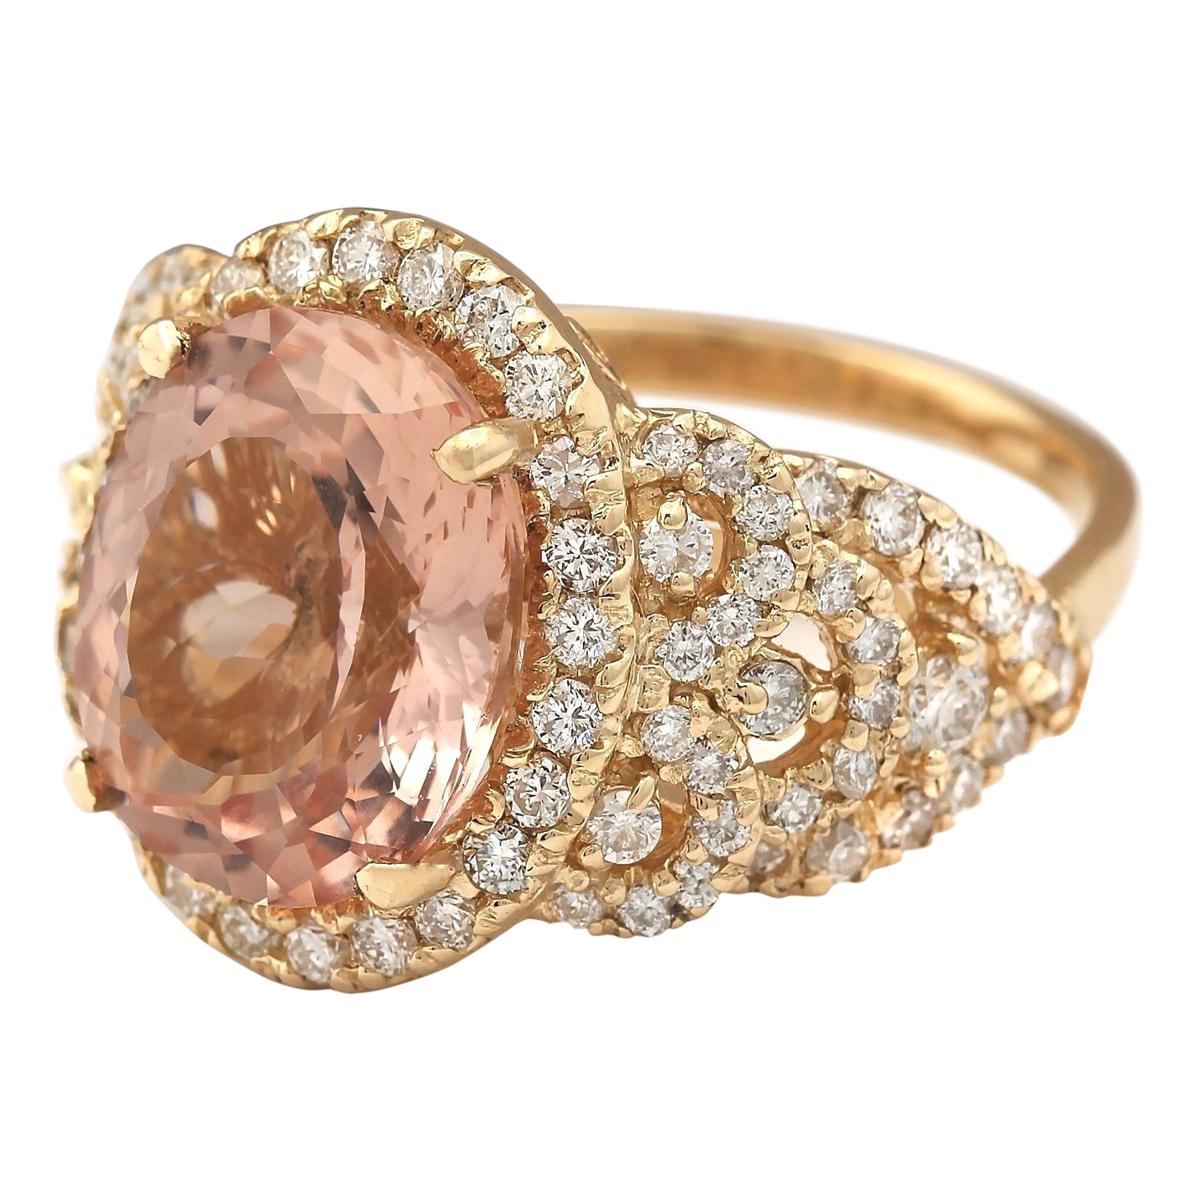 7.49 Carat Natural Morganite 14 Karat Yellow Gold Diamond Ring
Stamped: 14K Yellow Gold
Total Ring Weight: 10.0 Grams
Total Natural Morganite Weight is 5.99 Carat (Measures: 14.00x10.00 mm)
Color: Peach
Total Natural Diamond Weight is 1.50